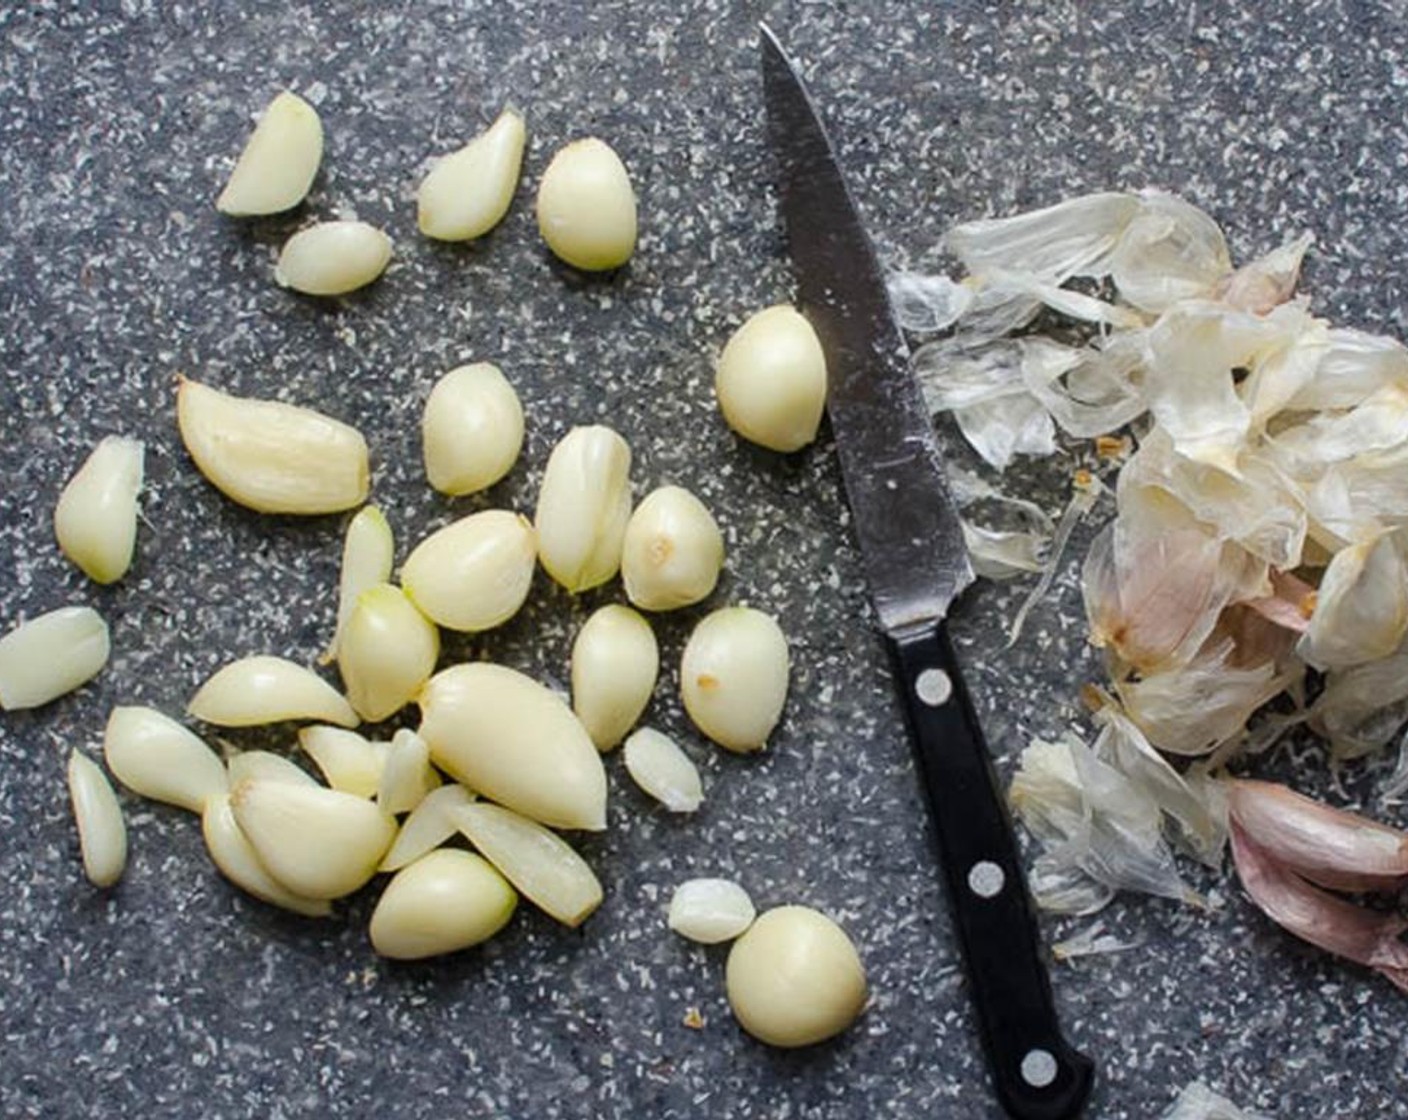 step 2 Bring a small saucepan of water to boil. Break apart the Garlic (2 cloves) and add them to the boiling water and cook for 1-2 minutes. Drain the garlic and peel the cloves, discarding the skins.